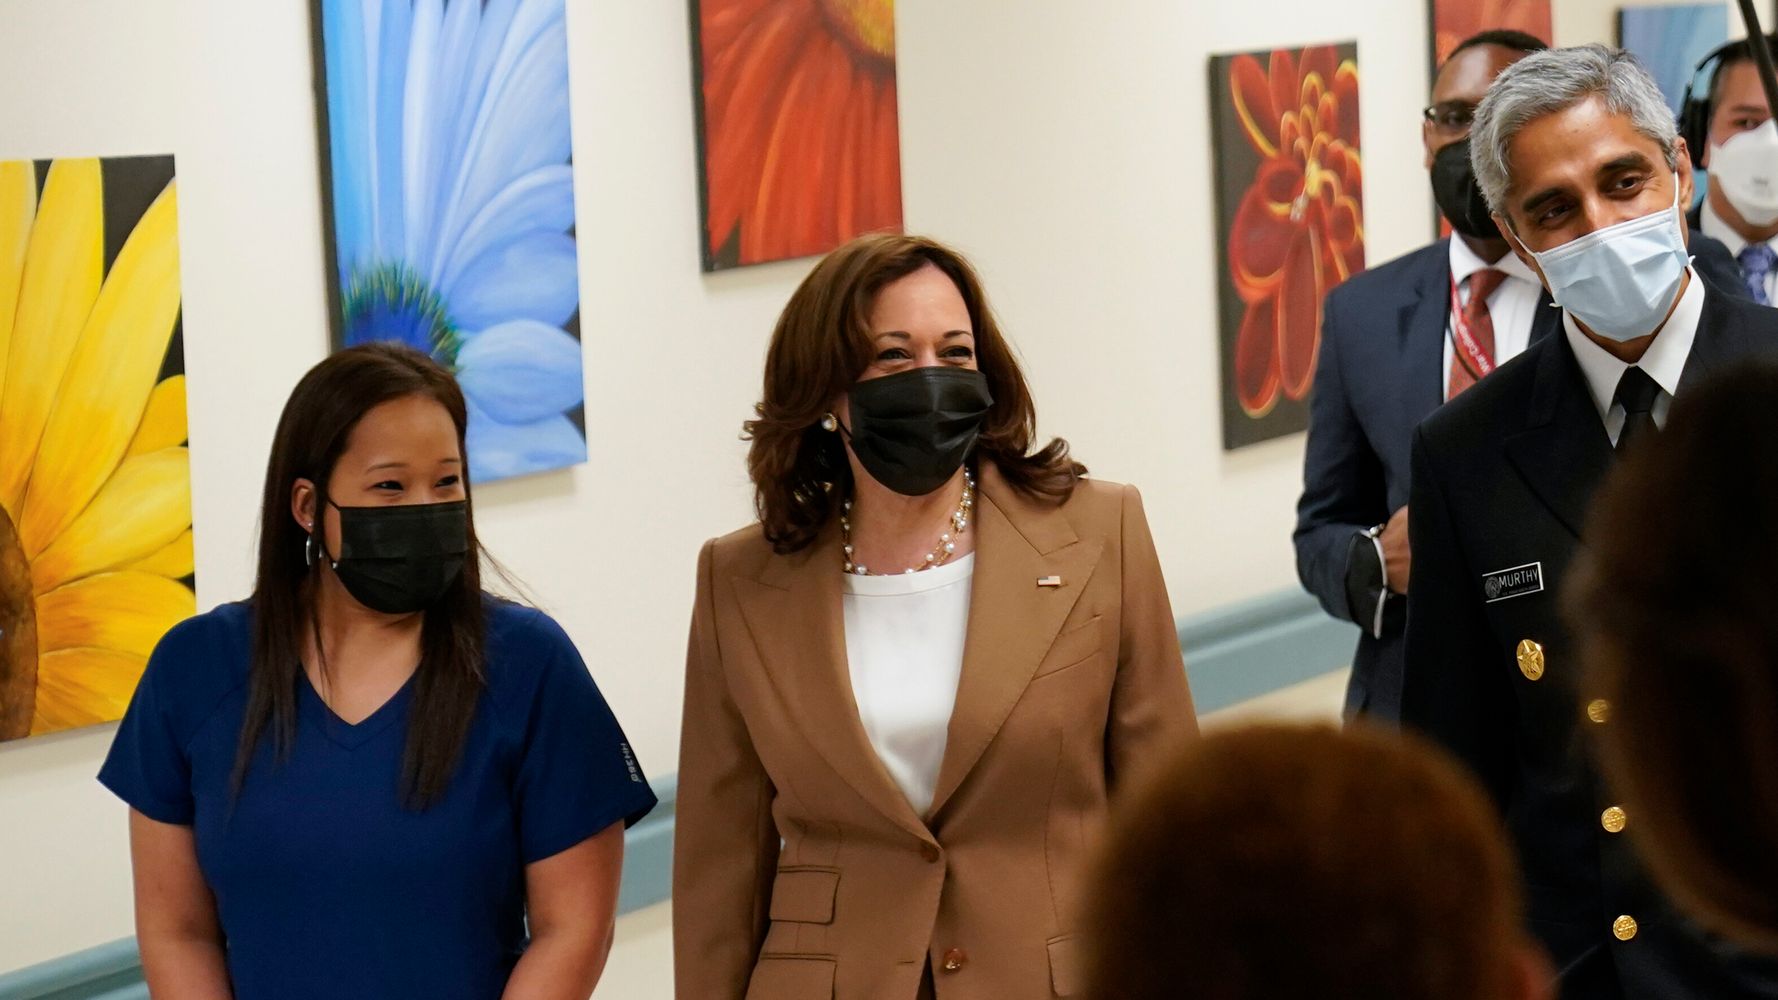 Harris, Surgeon General Warn Health Care Workers Are Burned Out From COVID-19 Pandemic